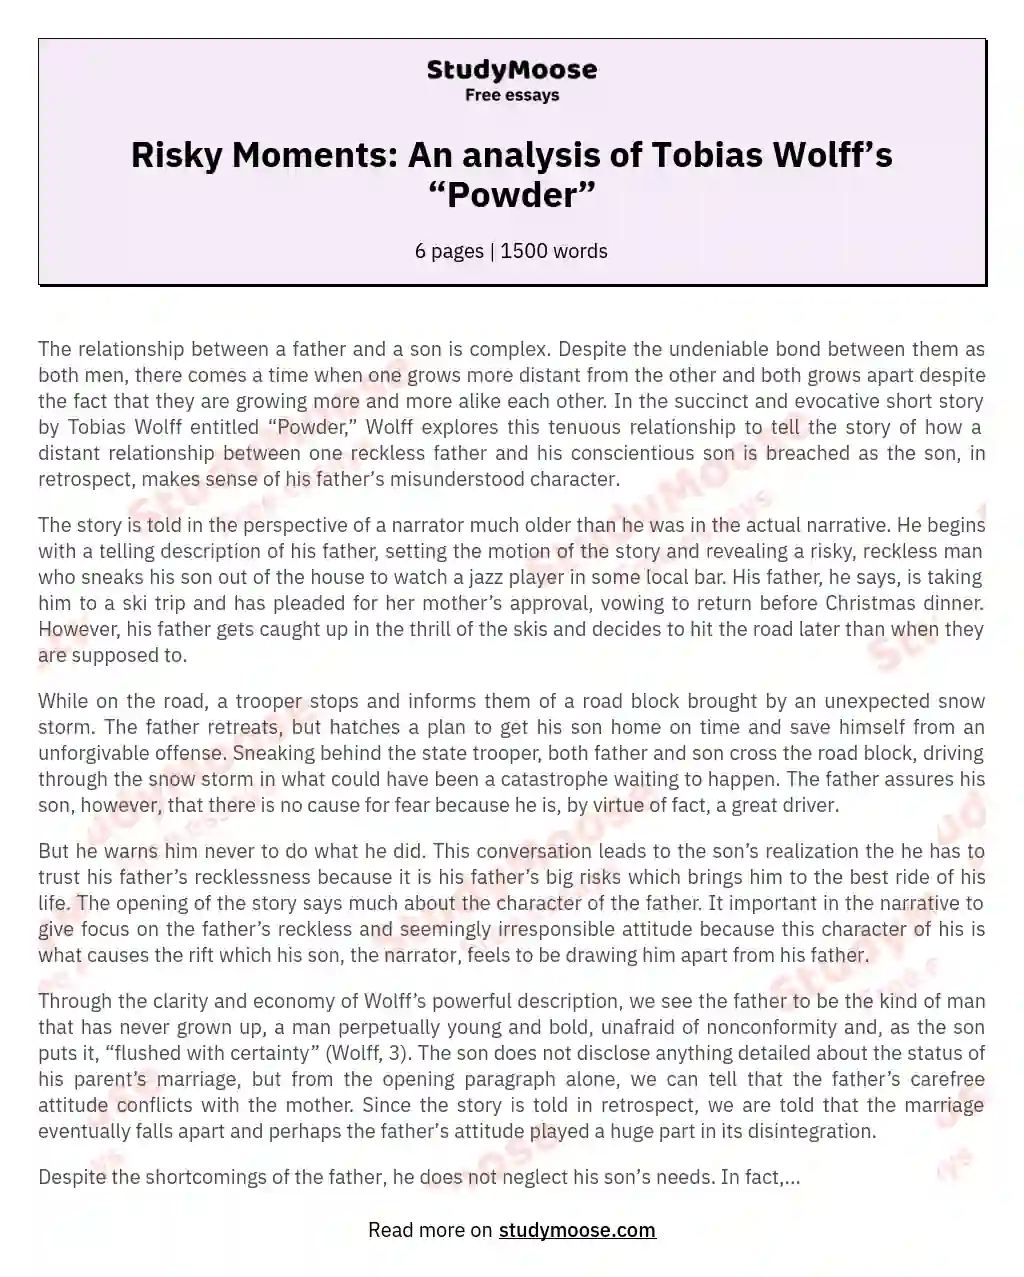 Risky Moments: An analysis of Tobias Wolff’s “Powder” essay